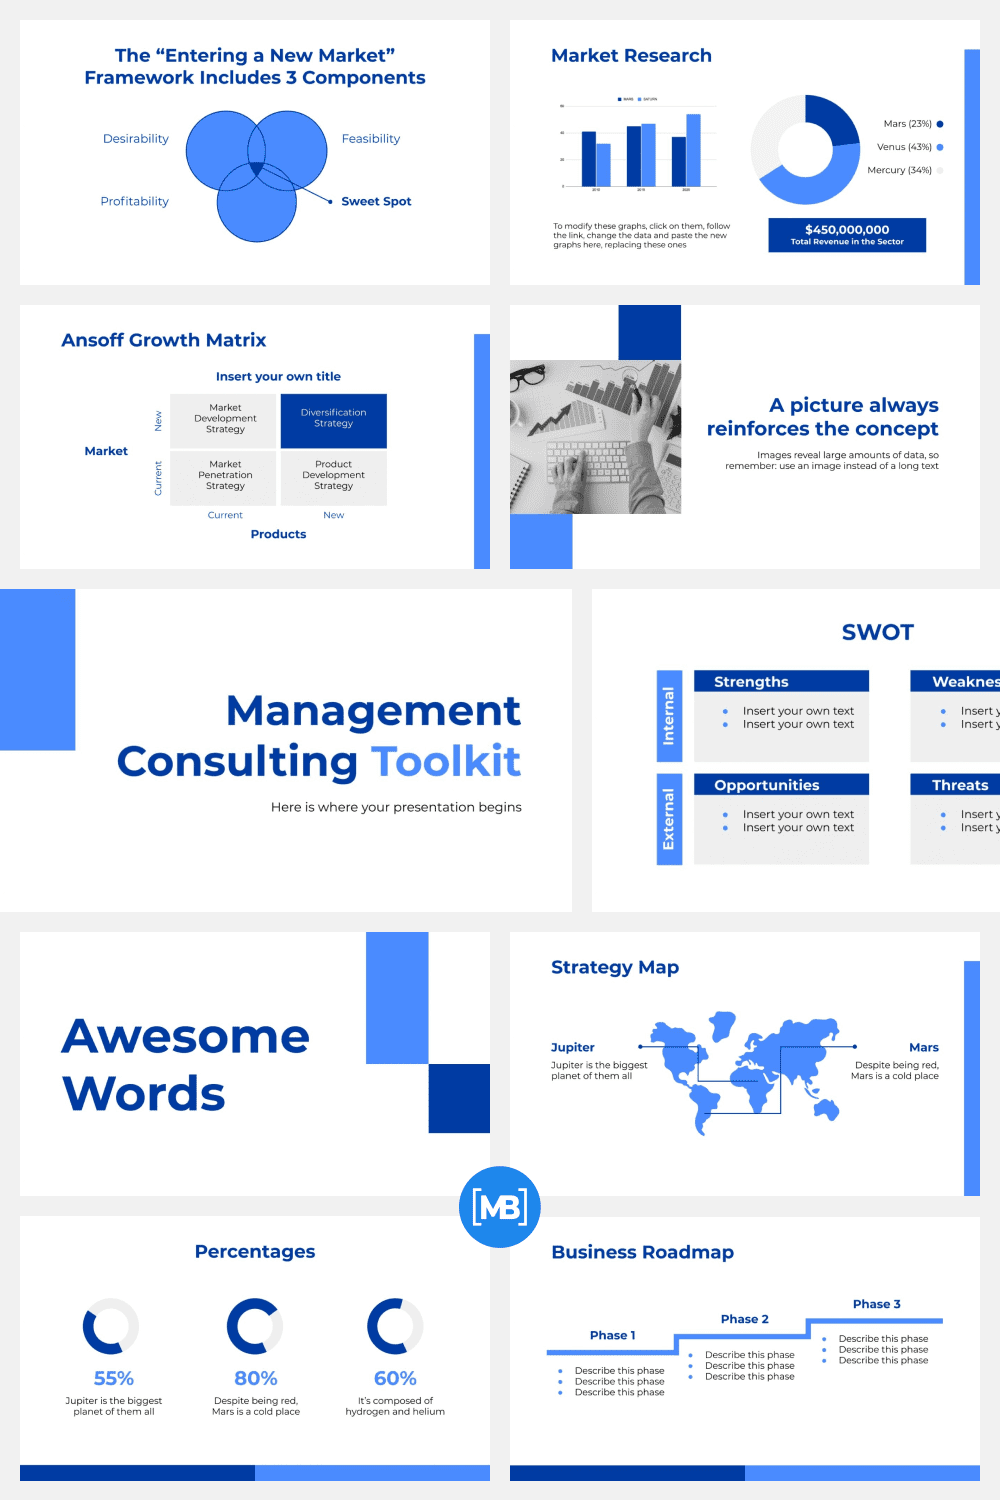 Management consulting toolkits.